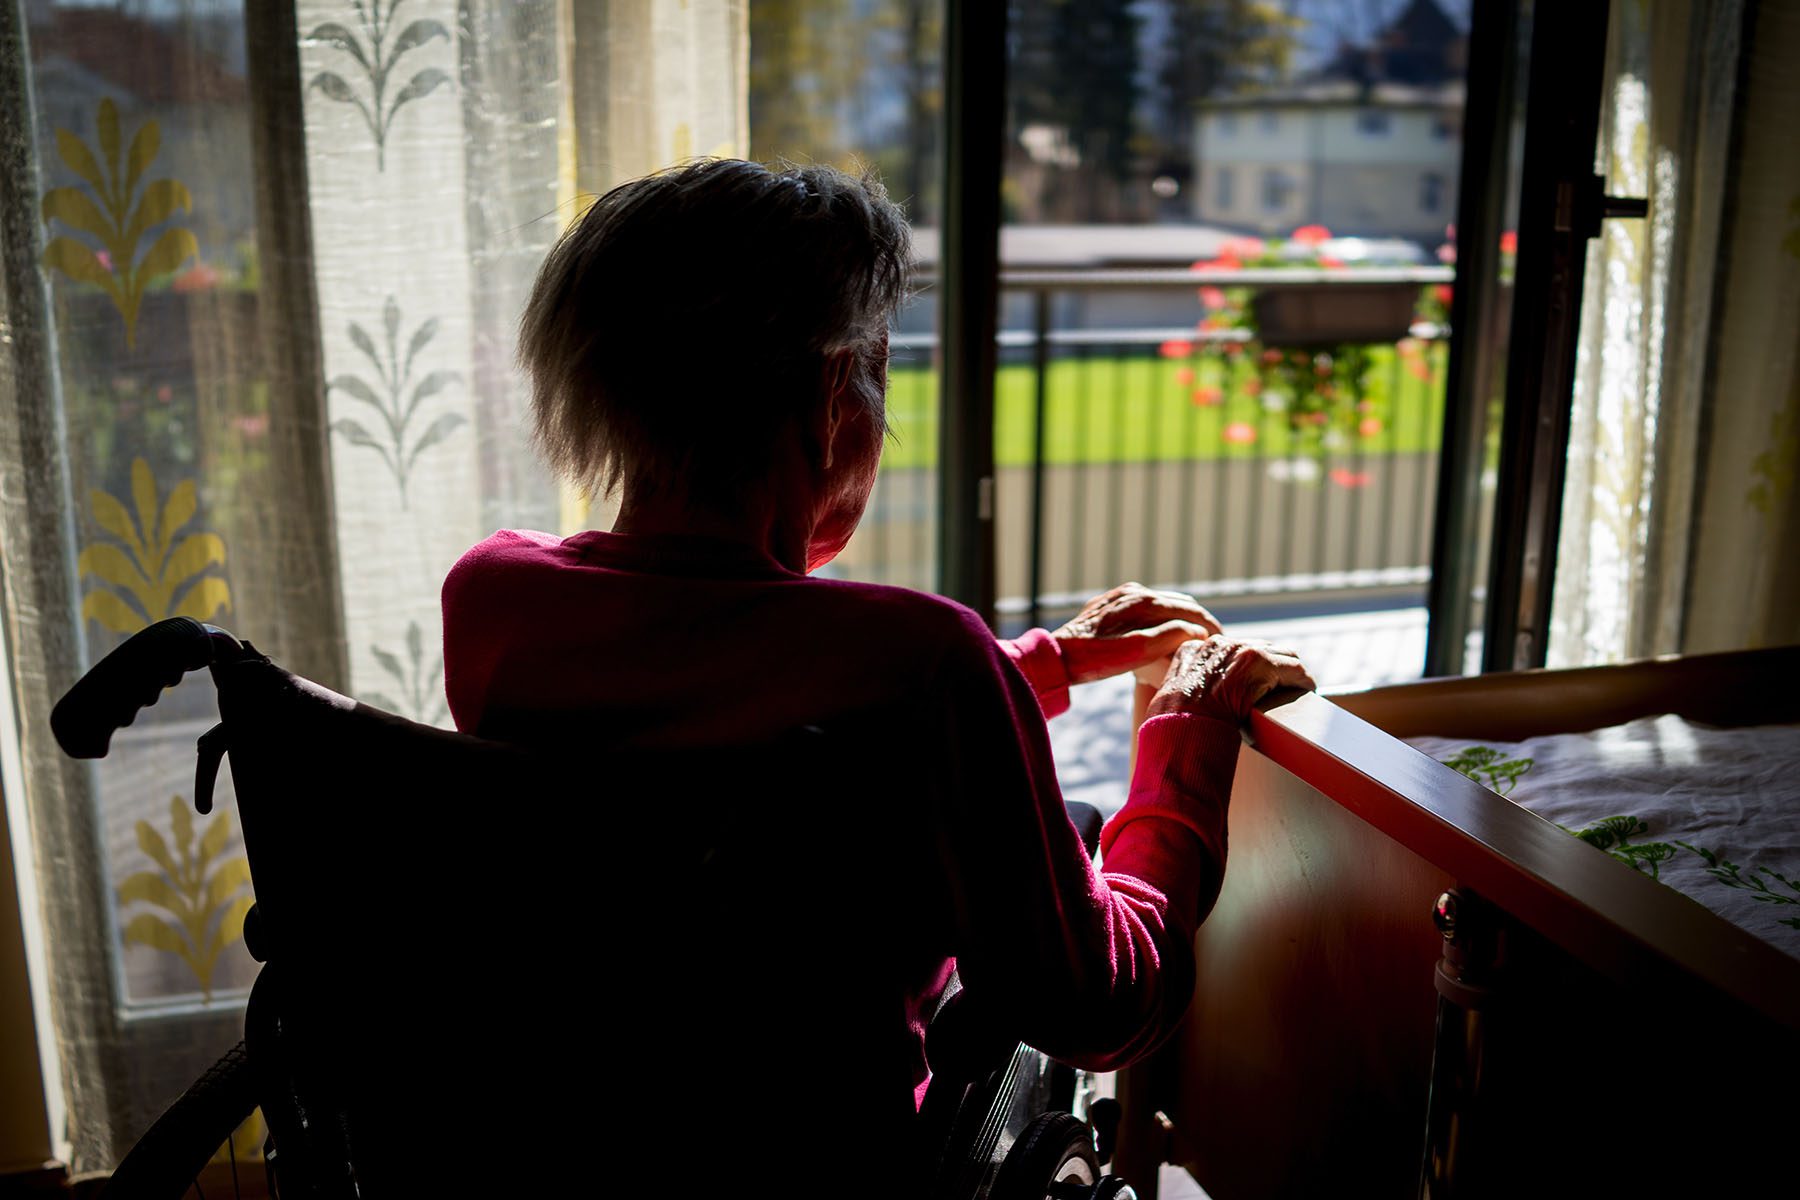 An older person in a wheelchair looks out a glass door. Their face is obscured while the sun shines on their hands.